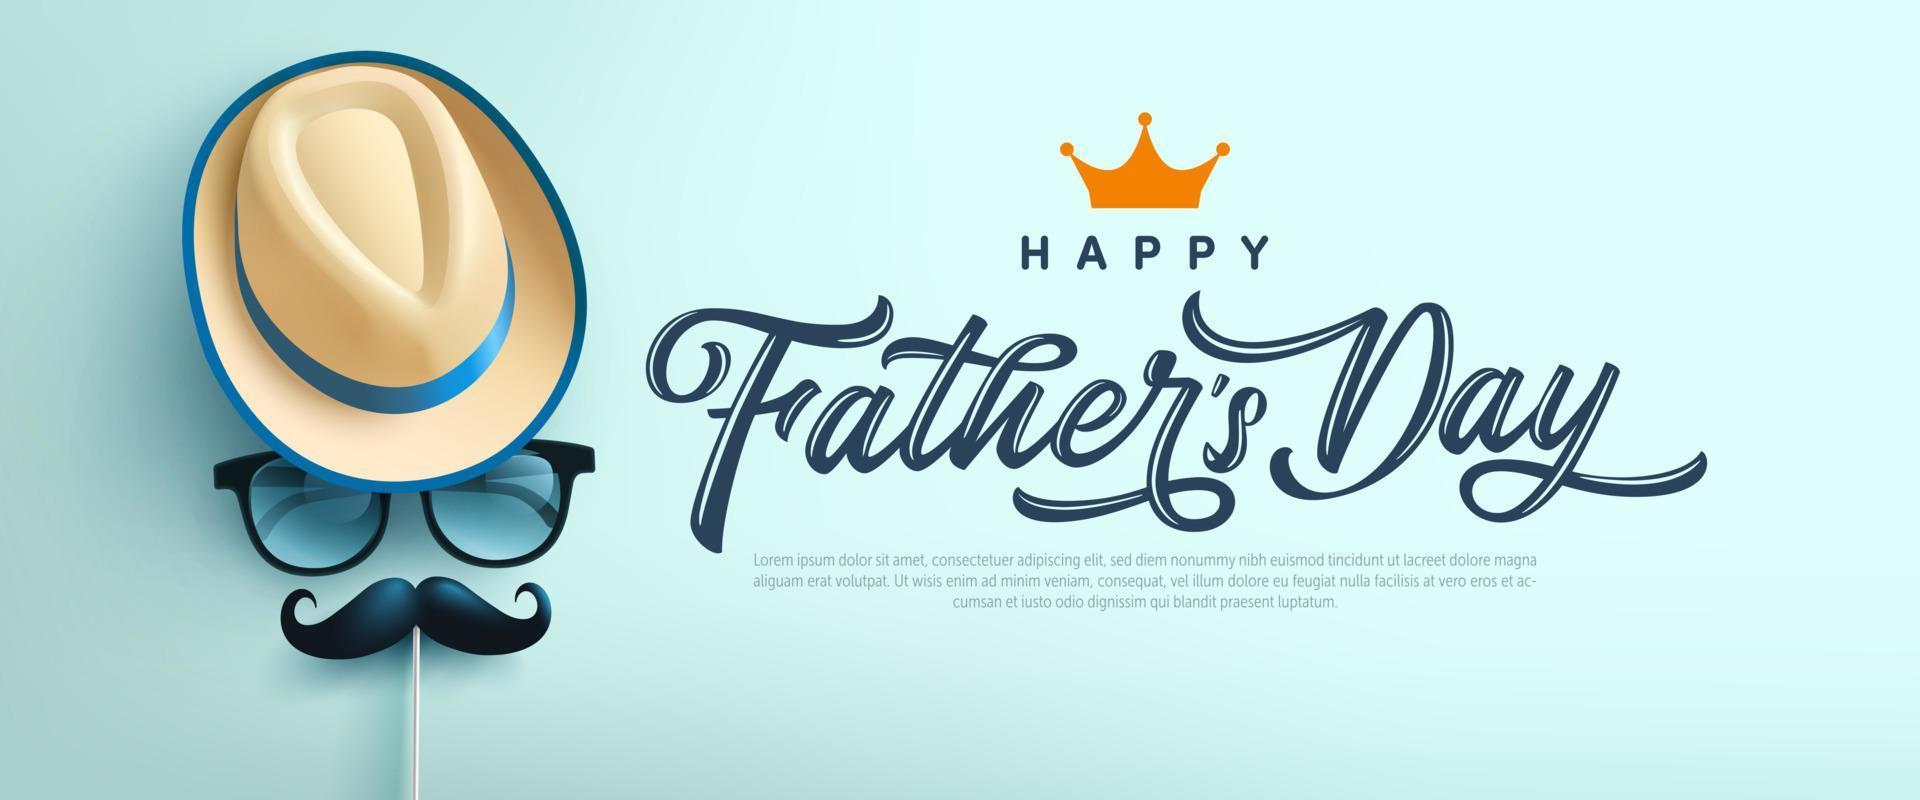 Father's Day poster or banner template with symbol of Dad from hat,glasses and mustache.Greetings and presents for Father's Day in flat lay styling.Promotion and shopping template for love dad vector